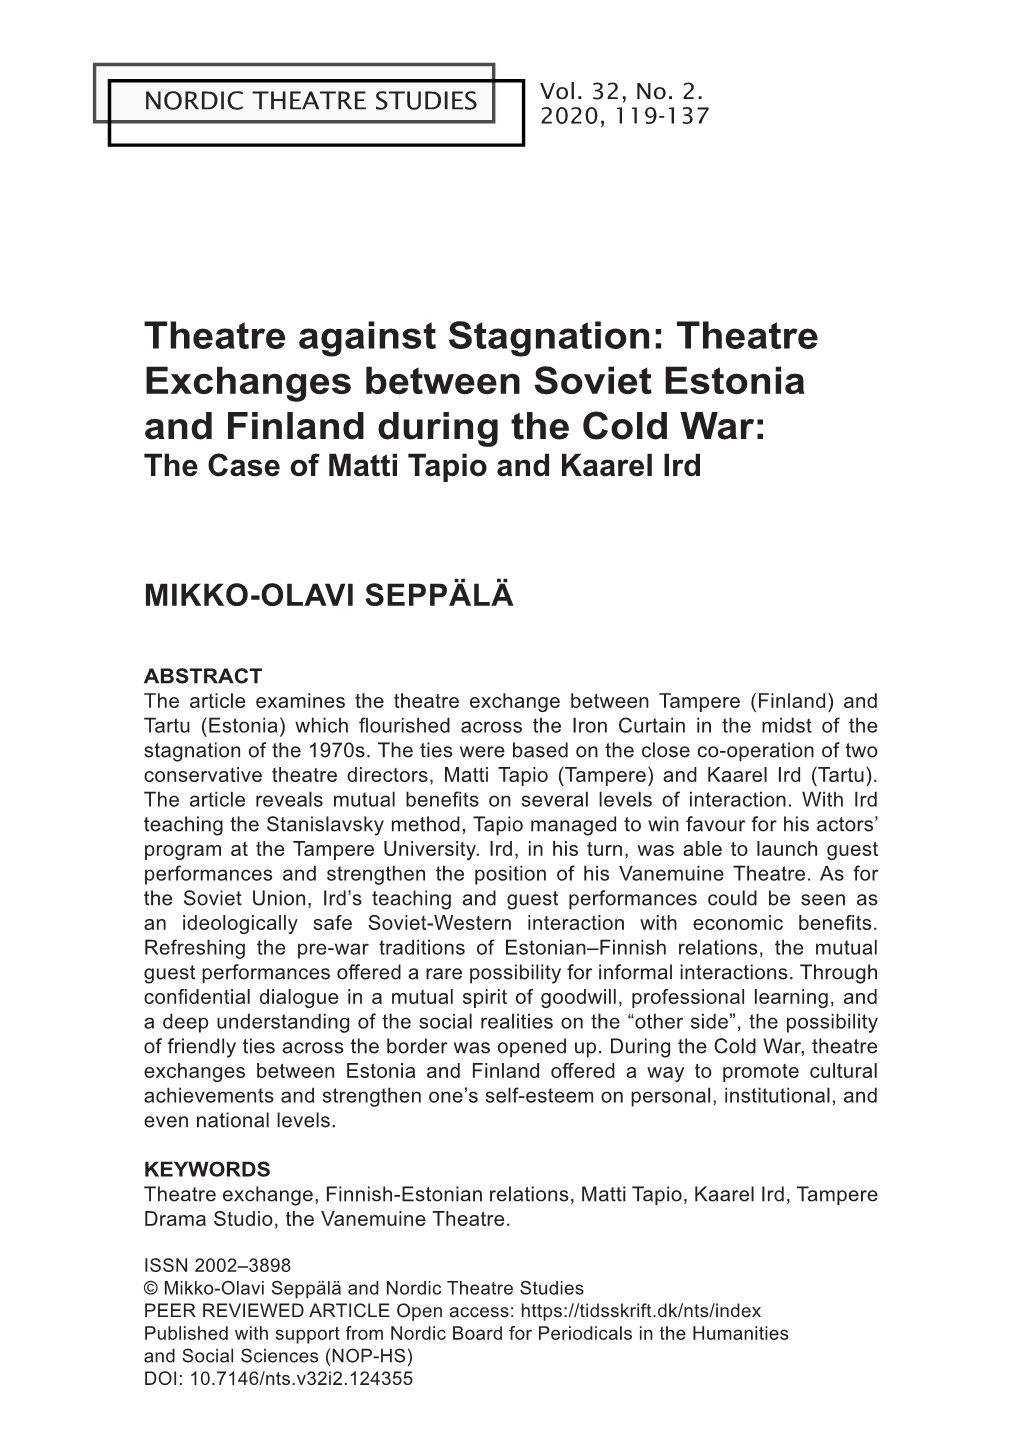 Theatre Exchanges Between Soviet Estonia and Finland During the Cold War: the Case of Matti Tapio and Kaarel Ird